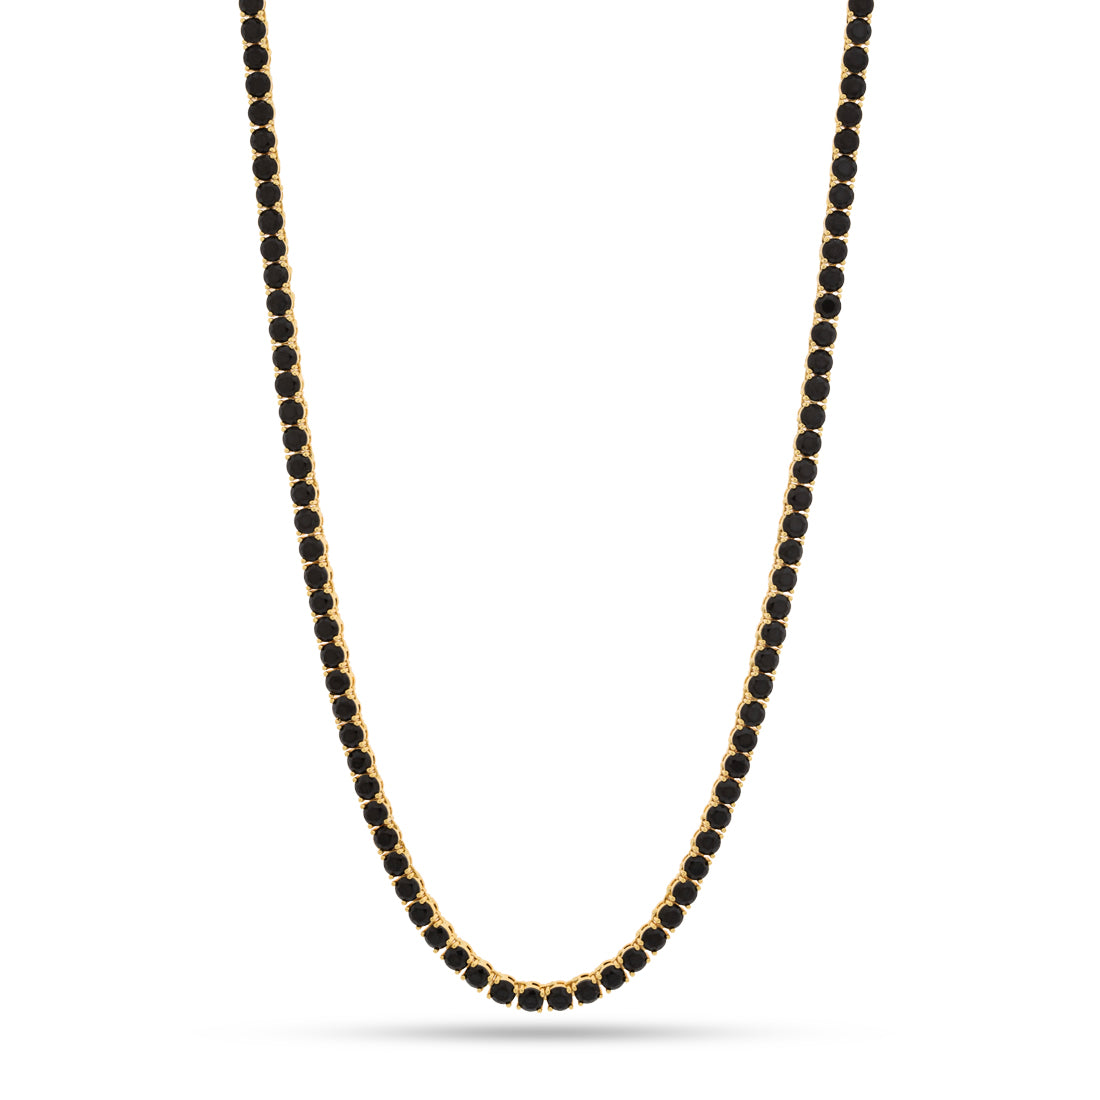 Gold Plated / 14K Gold / 24" 5mm Onyx Tennis Chain